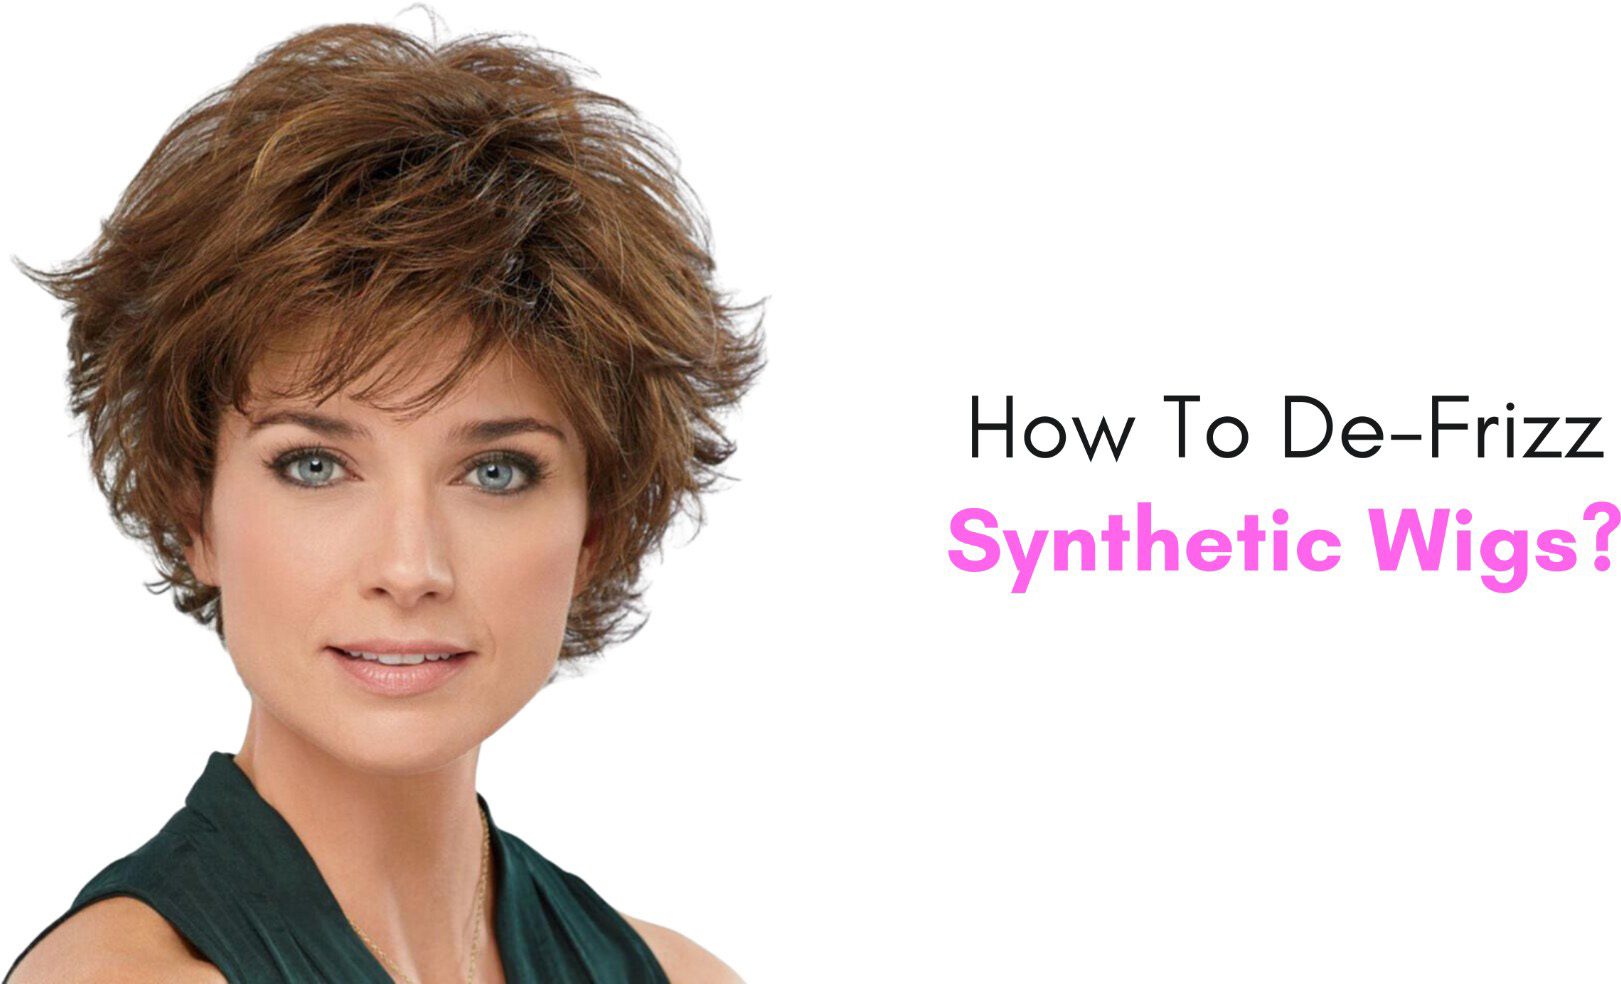 How To De-Frizz Synthetic Wigs?